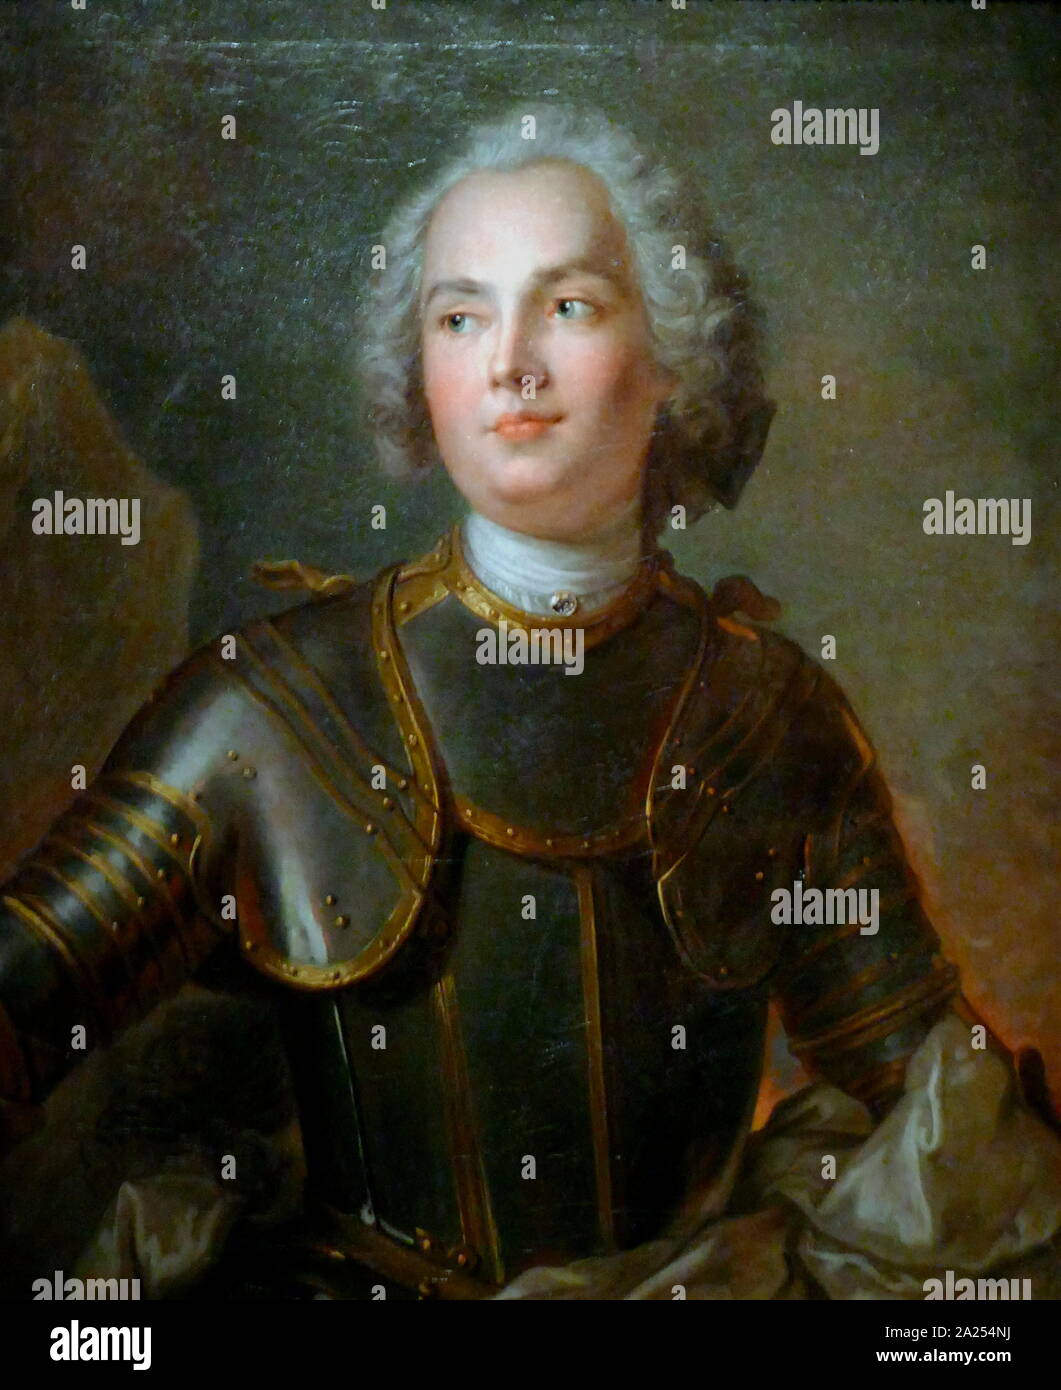 Adam Tarlo (1713-1744); Polish nobleman. portrait by Jean-Marc Nattier (1685-1766). Date circa 1740. Tarlo was during the War of Polish Succession (1734-1738), a supporter of Stanislaw I Leszczynski and was commander of partisans of the short-lived Dzikow Confederation. He was killed by Count Kazimierz Poniatowski in a duel in 1744 Stock Photo